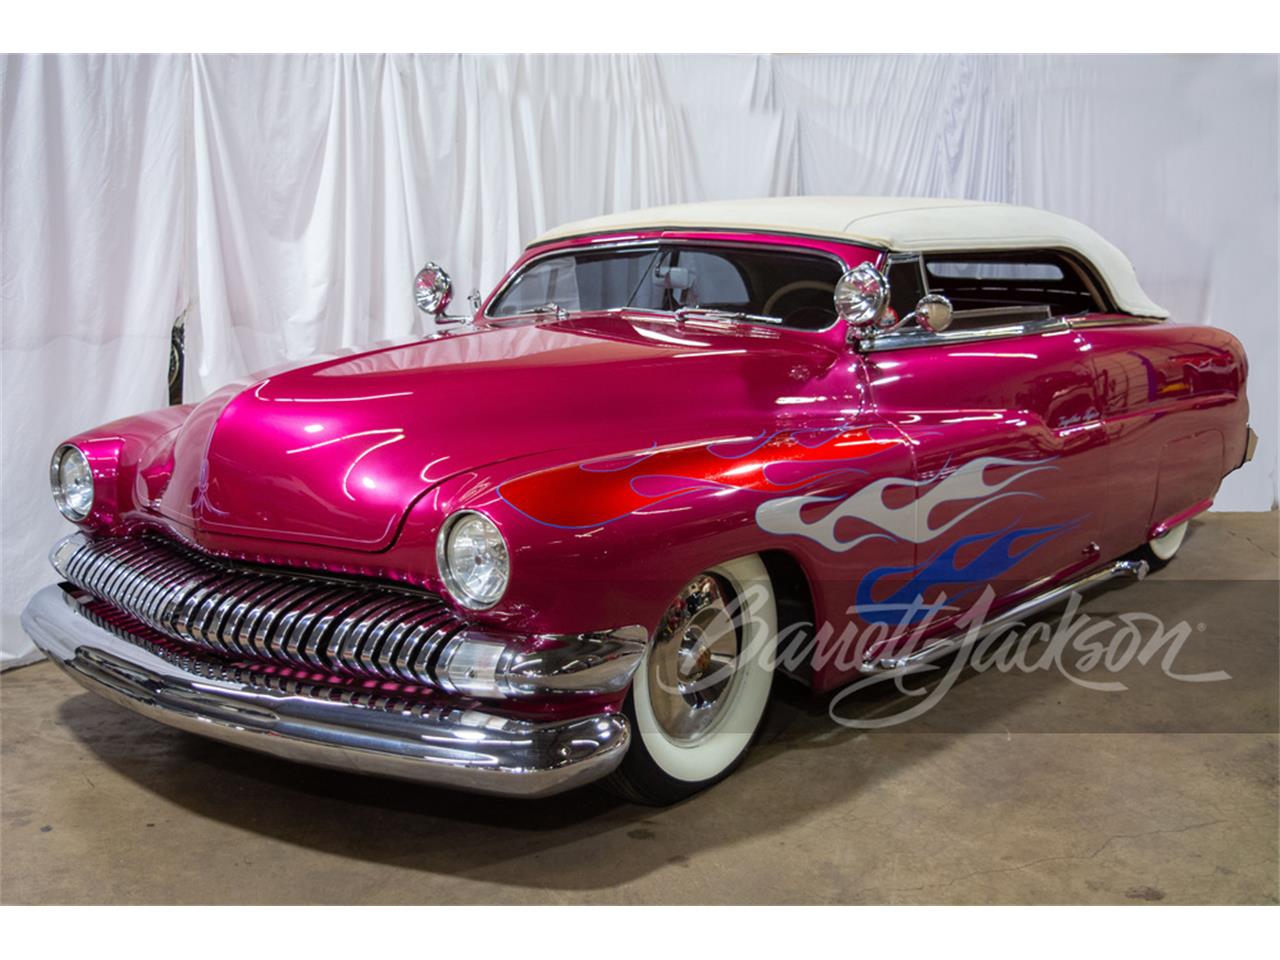 For Sale at Auction: 1951 Mercury Custom in Scottsdale, Arizona for sale in Scottsdale, AZ